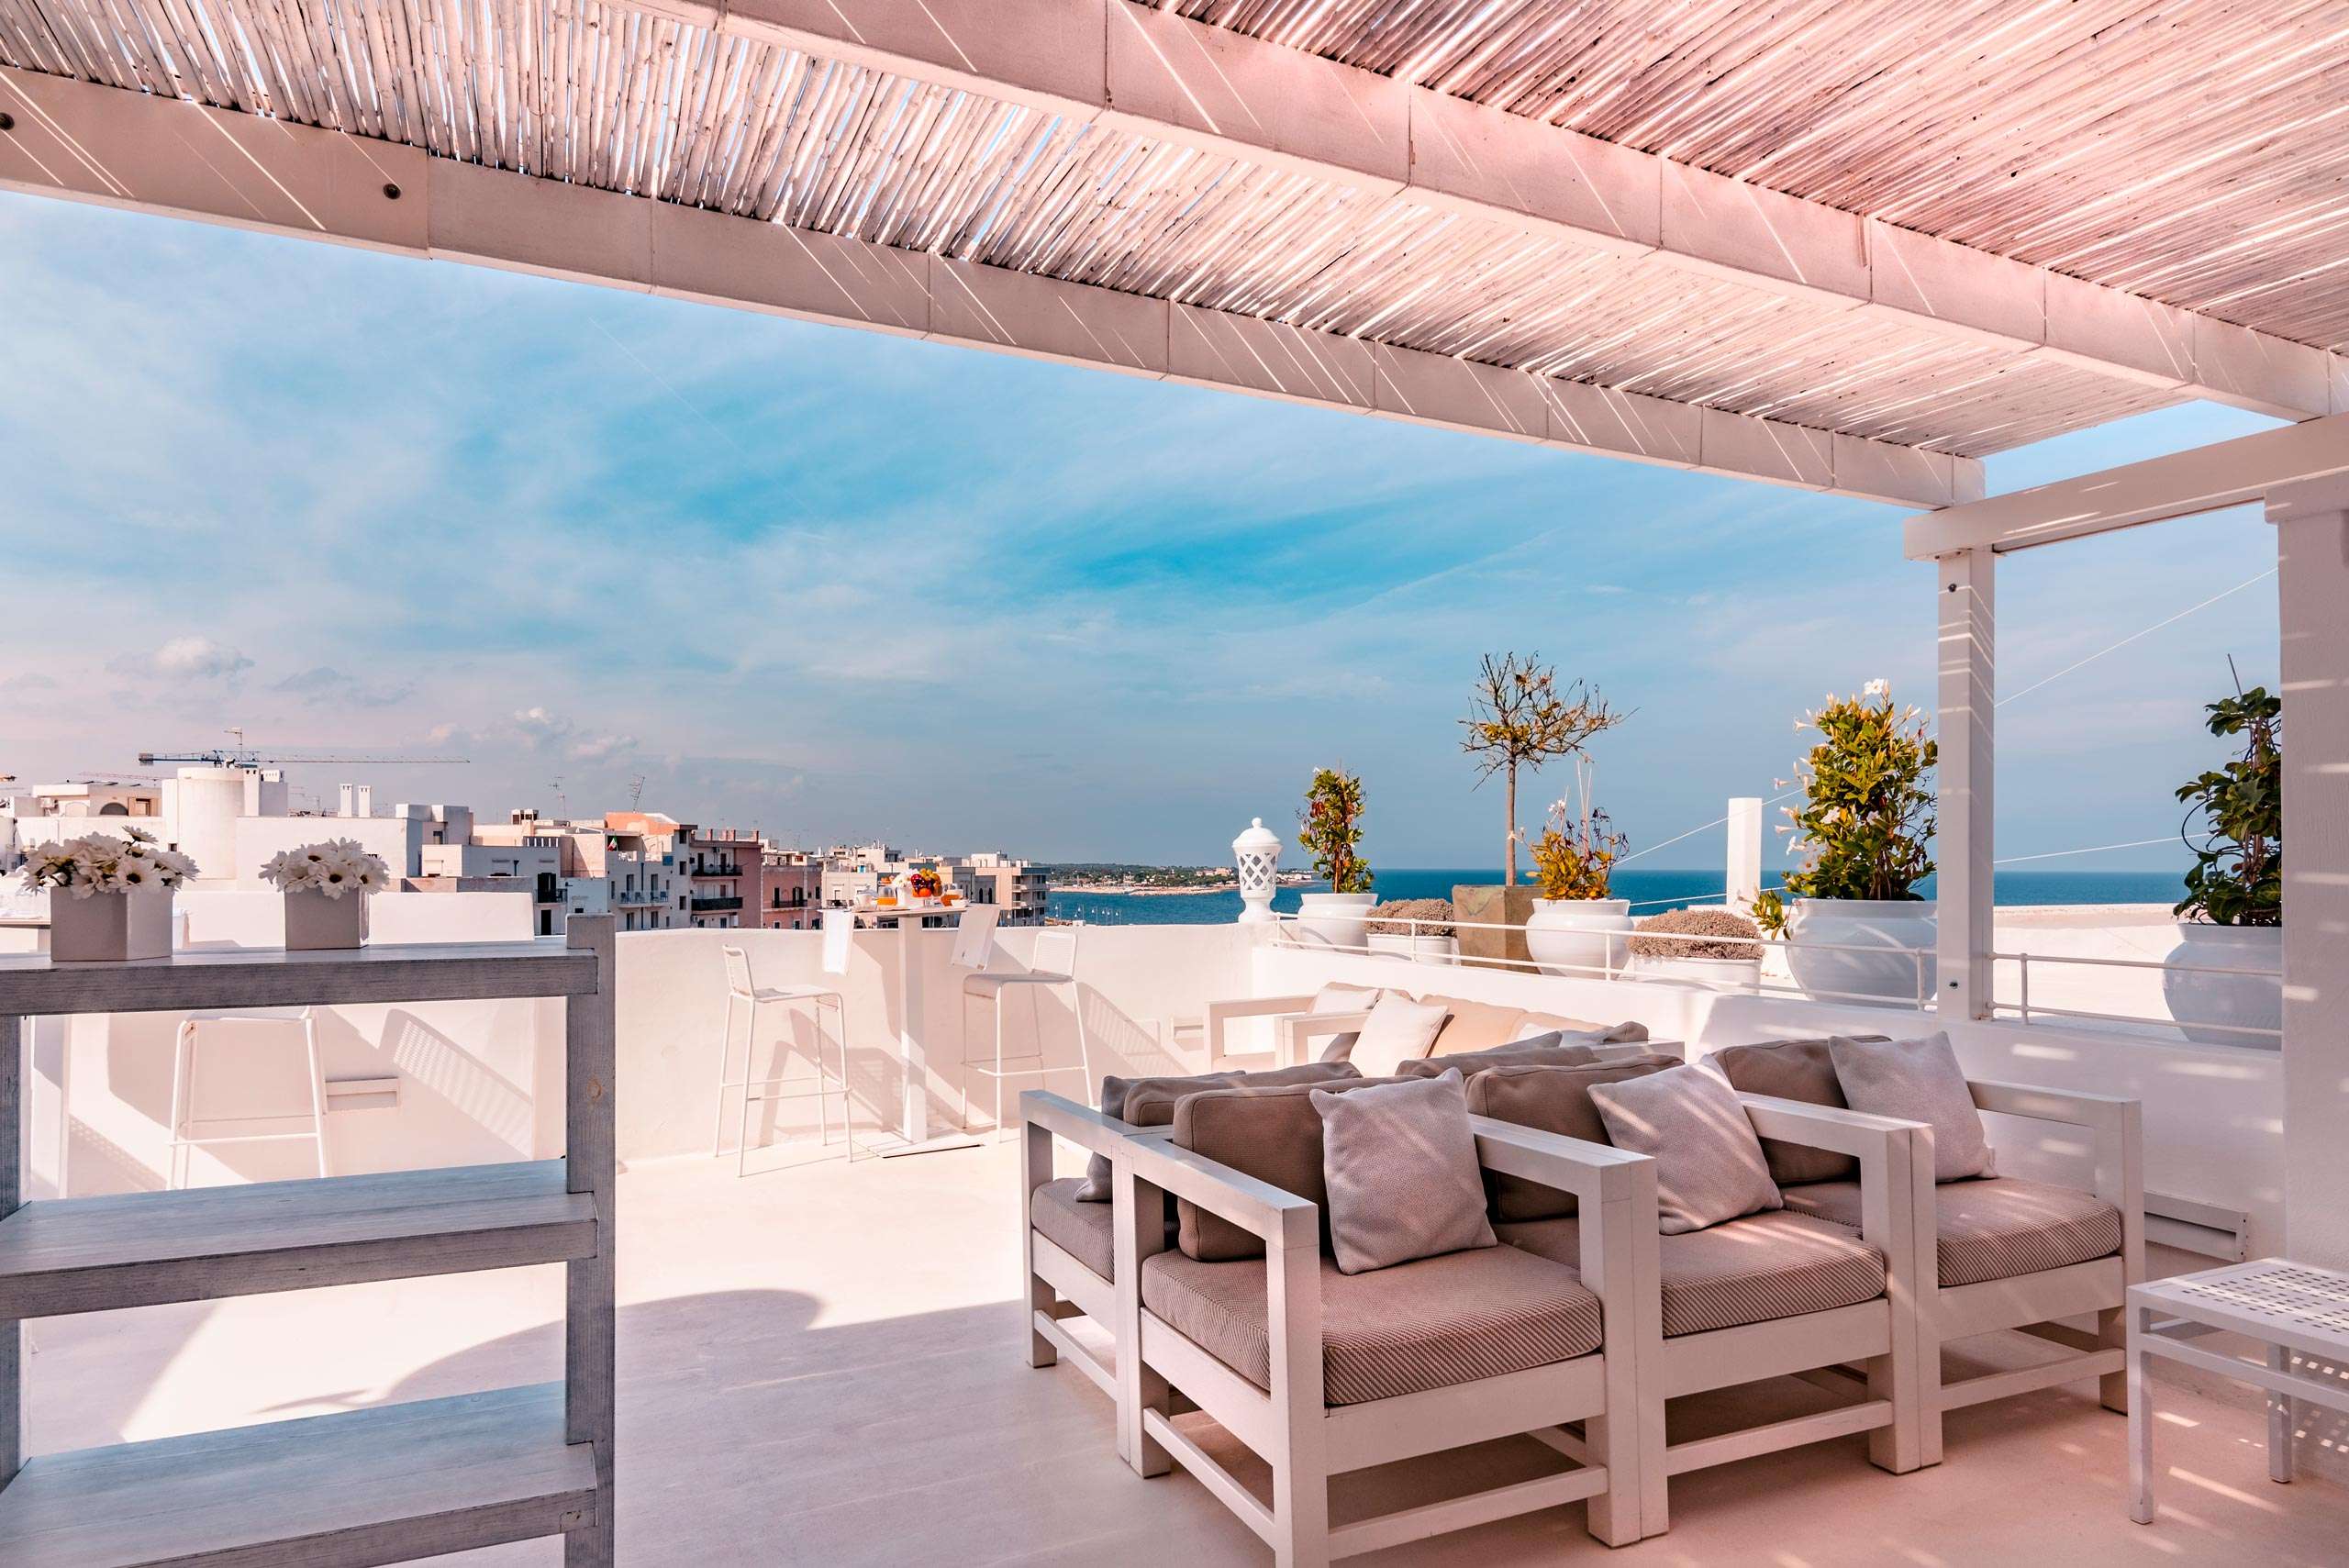 Terrace at San Michele Suite with its luxury suites in Polignano a Mare